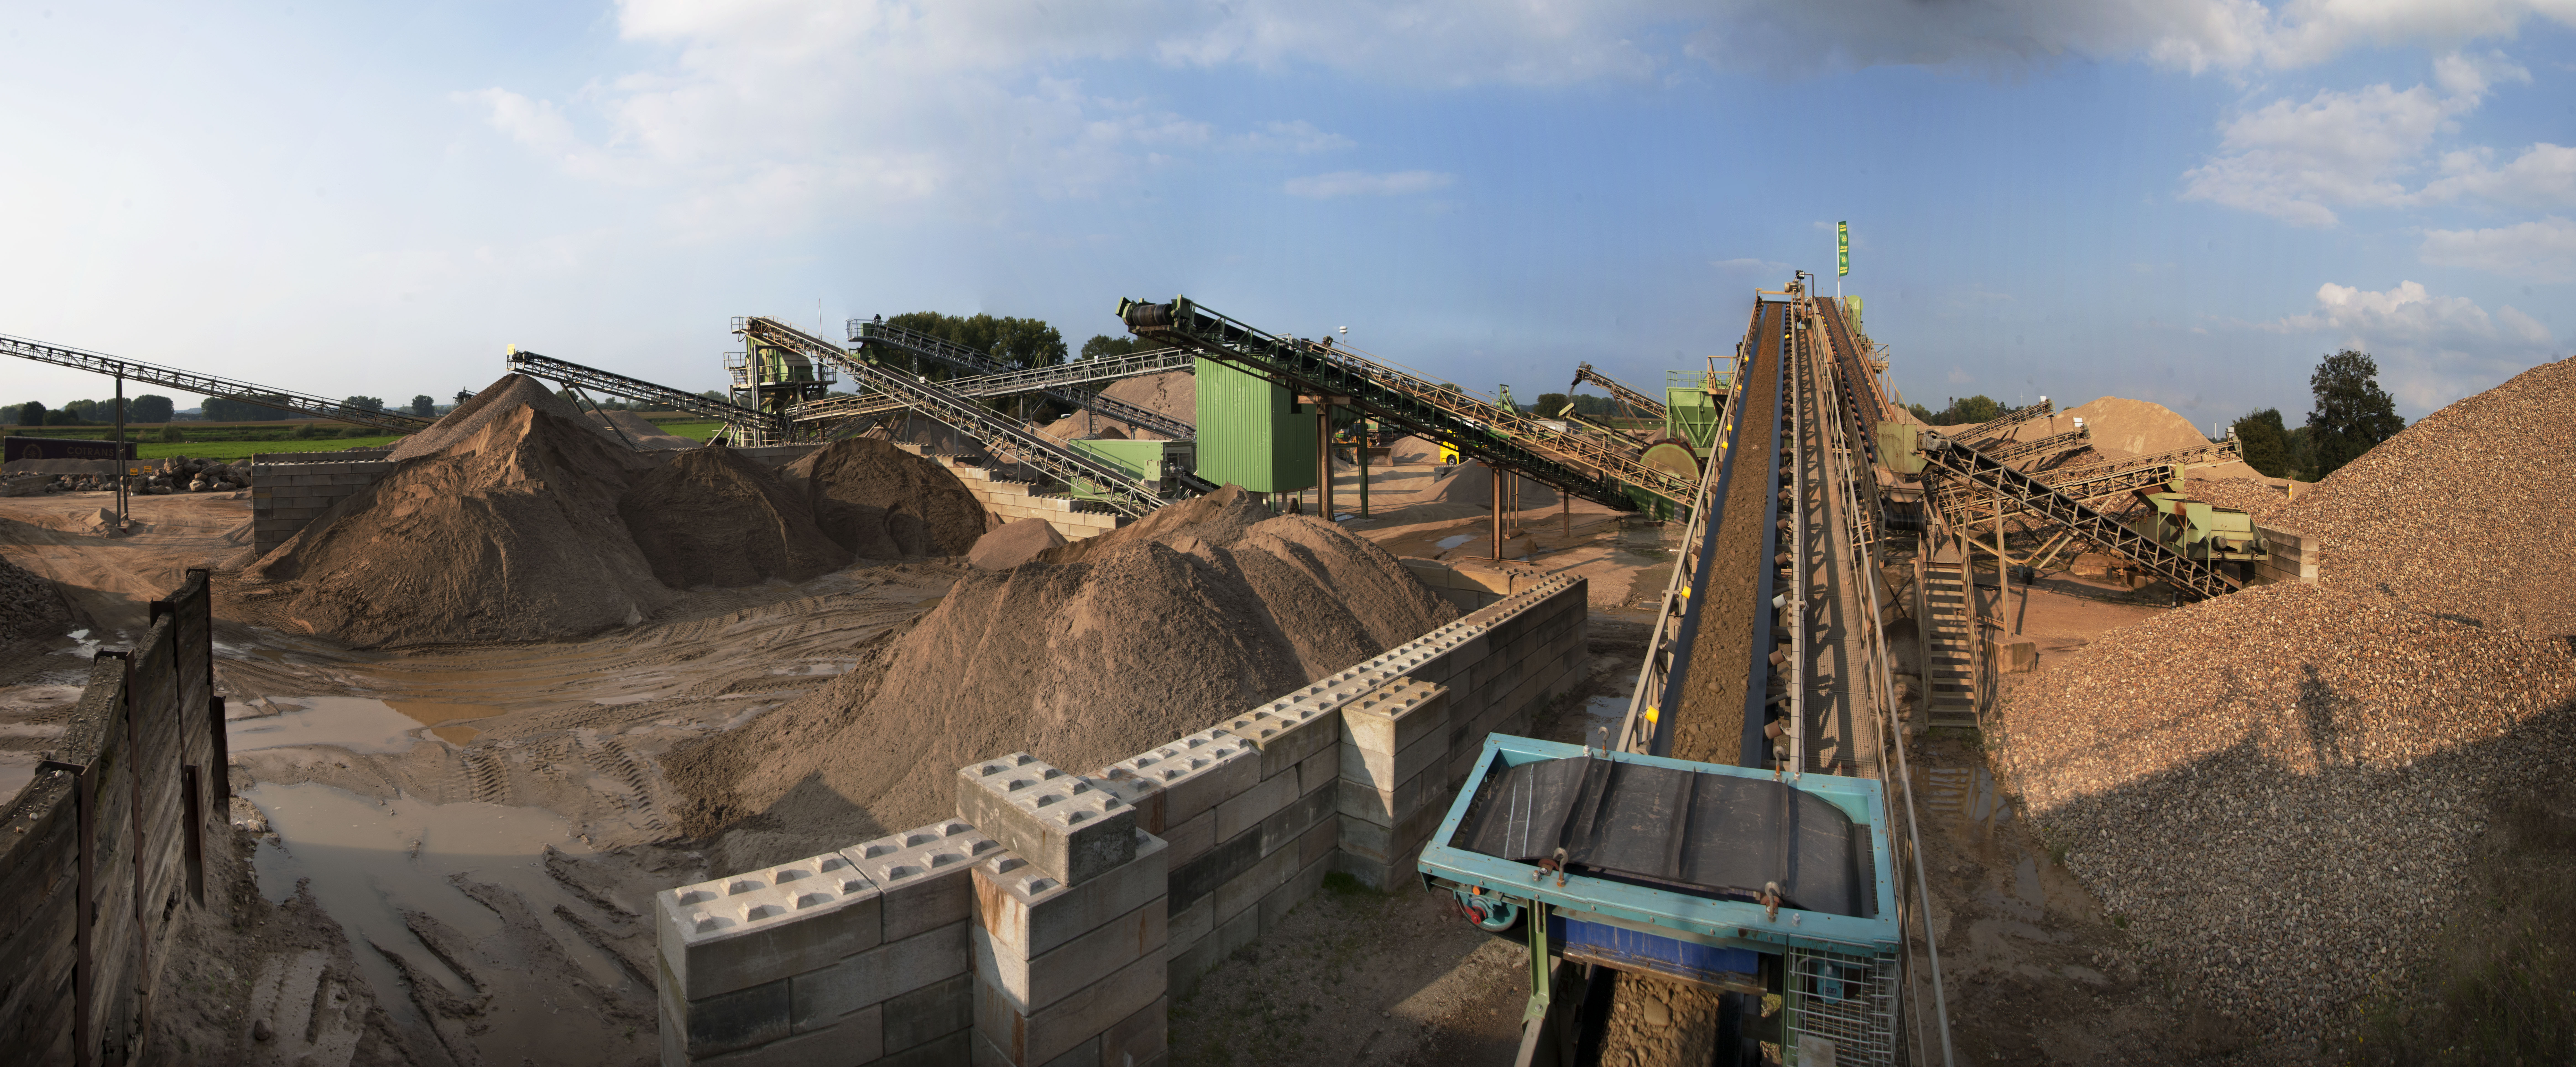 Sand and Gravel extraction